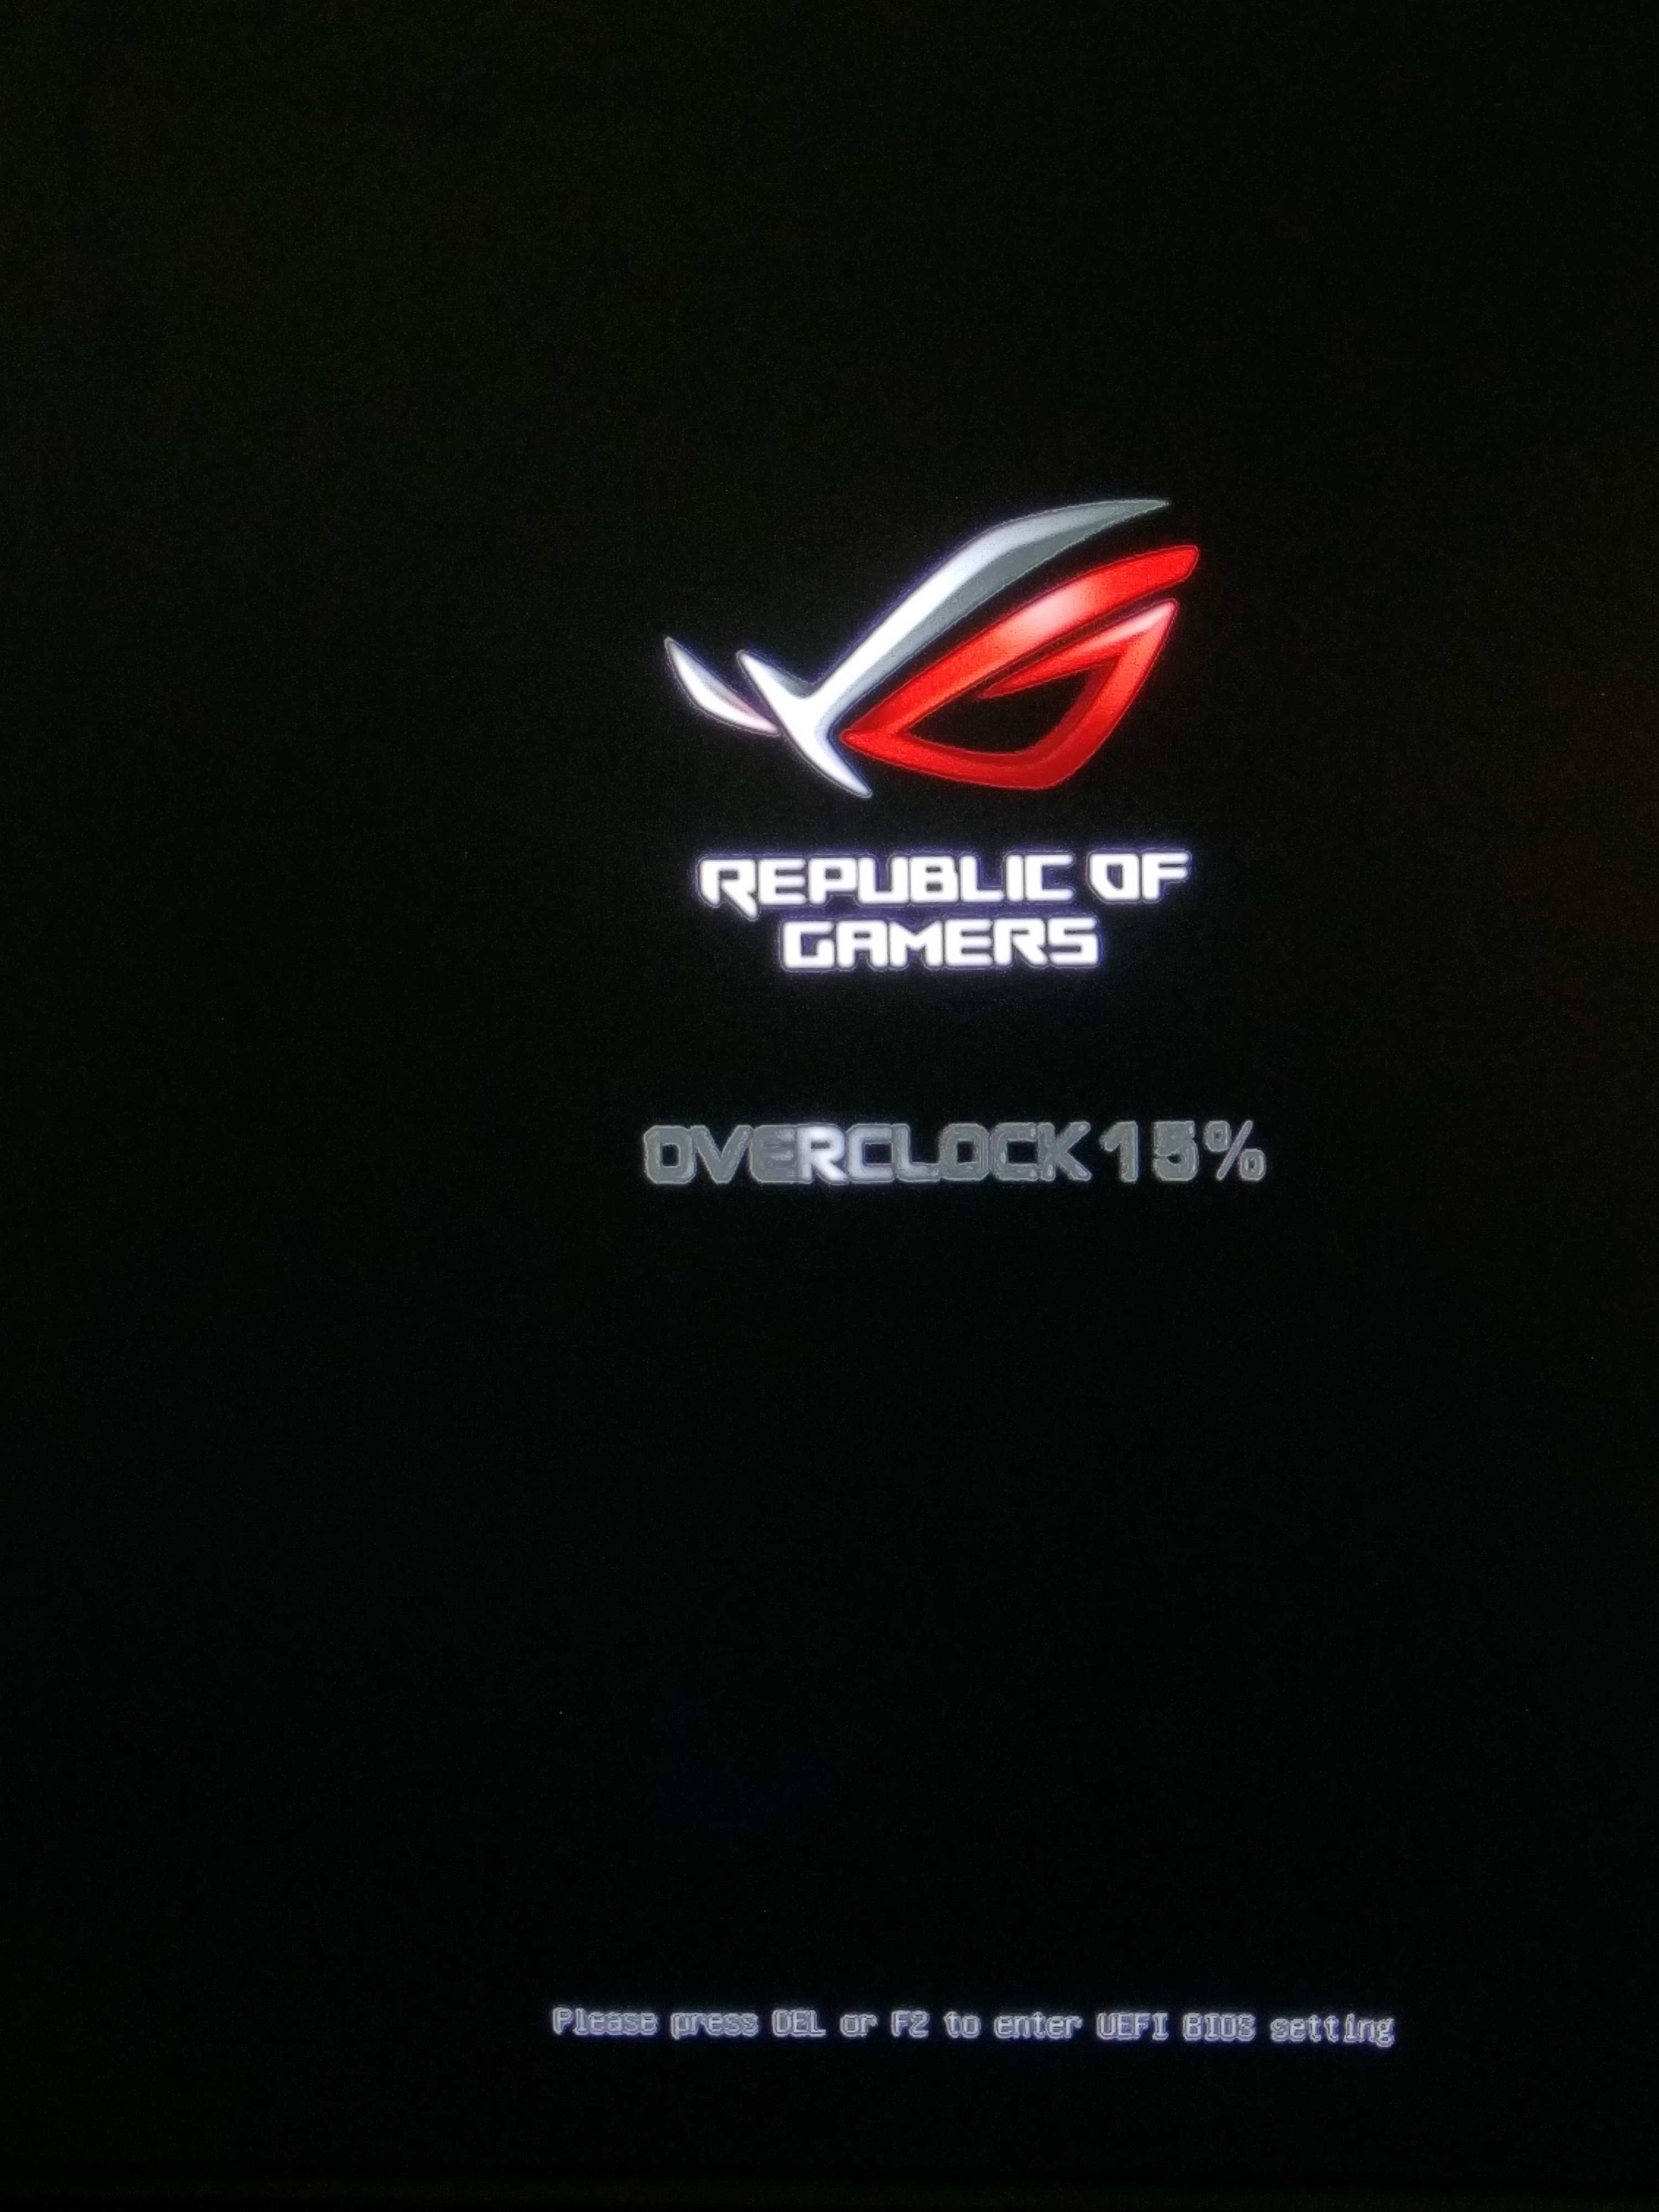 Rog overclocking boot screen - CPUs, Motherboards, and Memory - Linus Tech  Tips